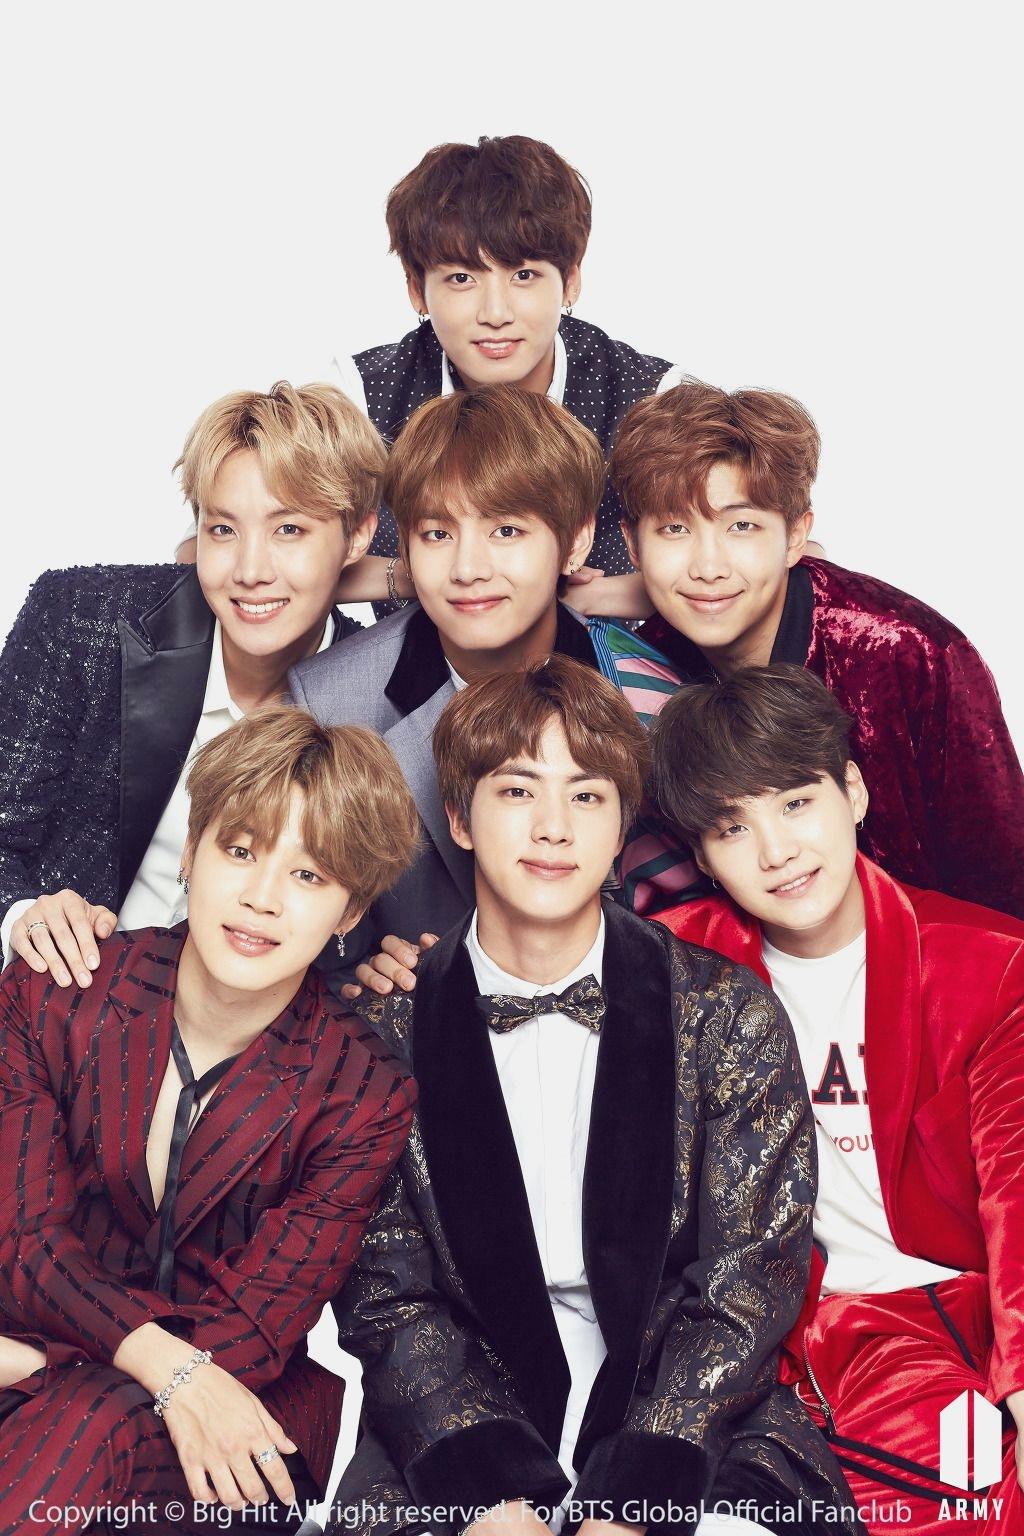 BTS Photoshoot Wallpapers - Wallpaper Cave